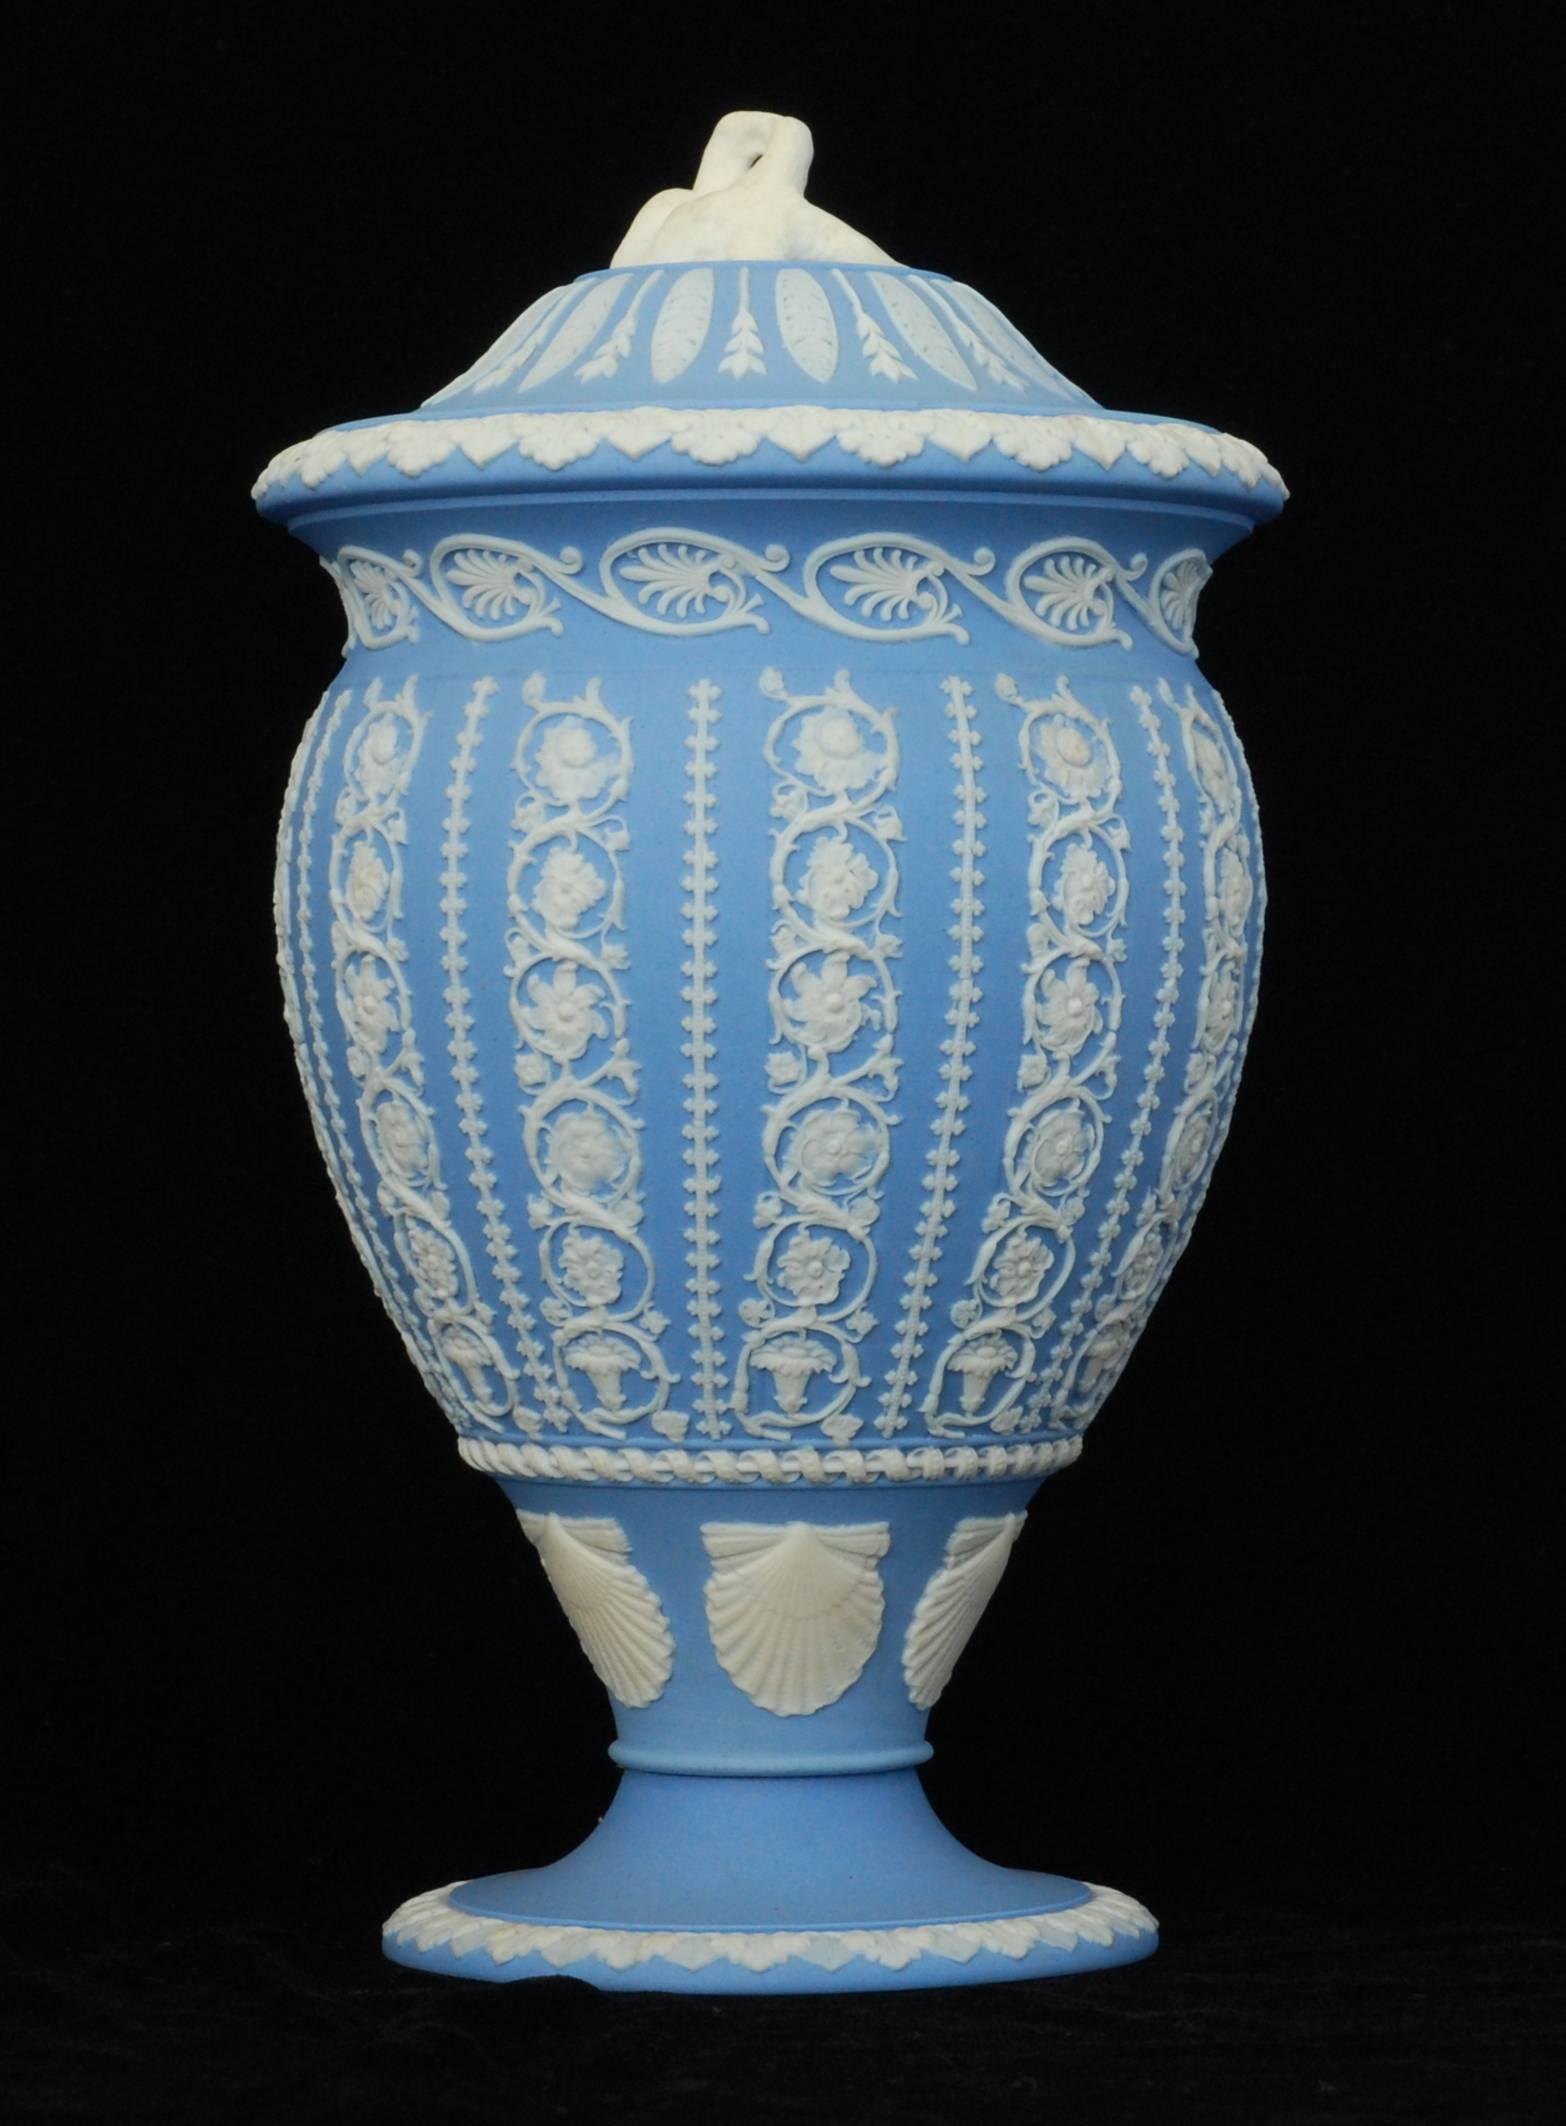 A finely worked vase in solid pale-blue jasper, engine turned and decorated with arabesque designs; the lovebird finial finishes the composition very nicely.